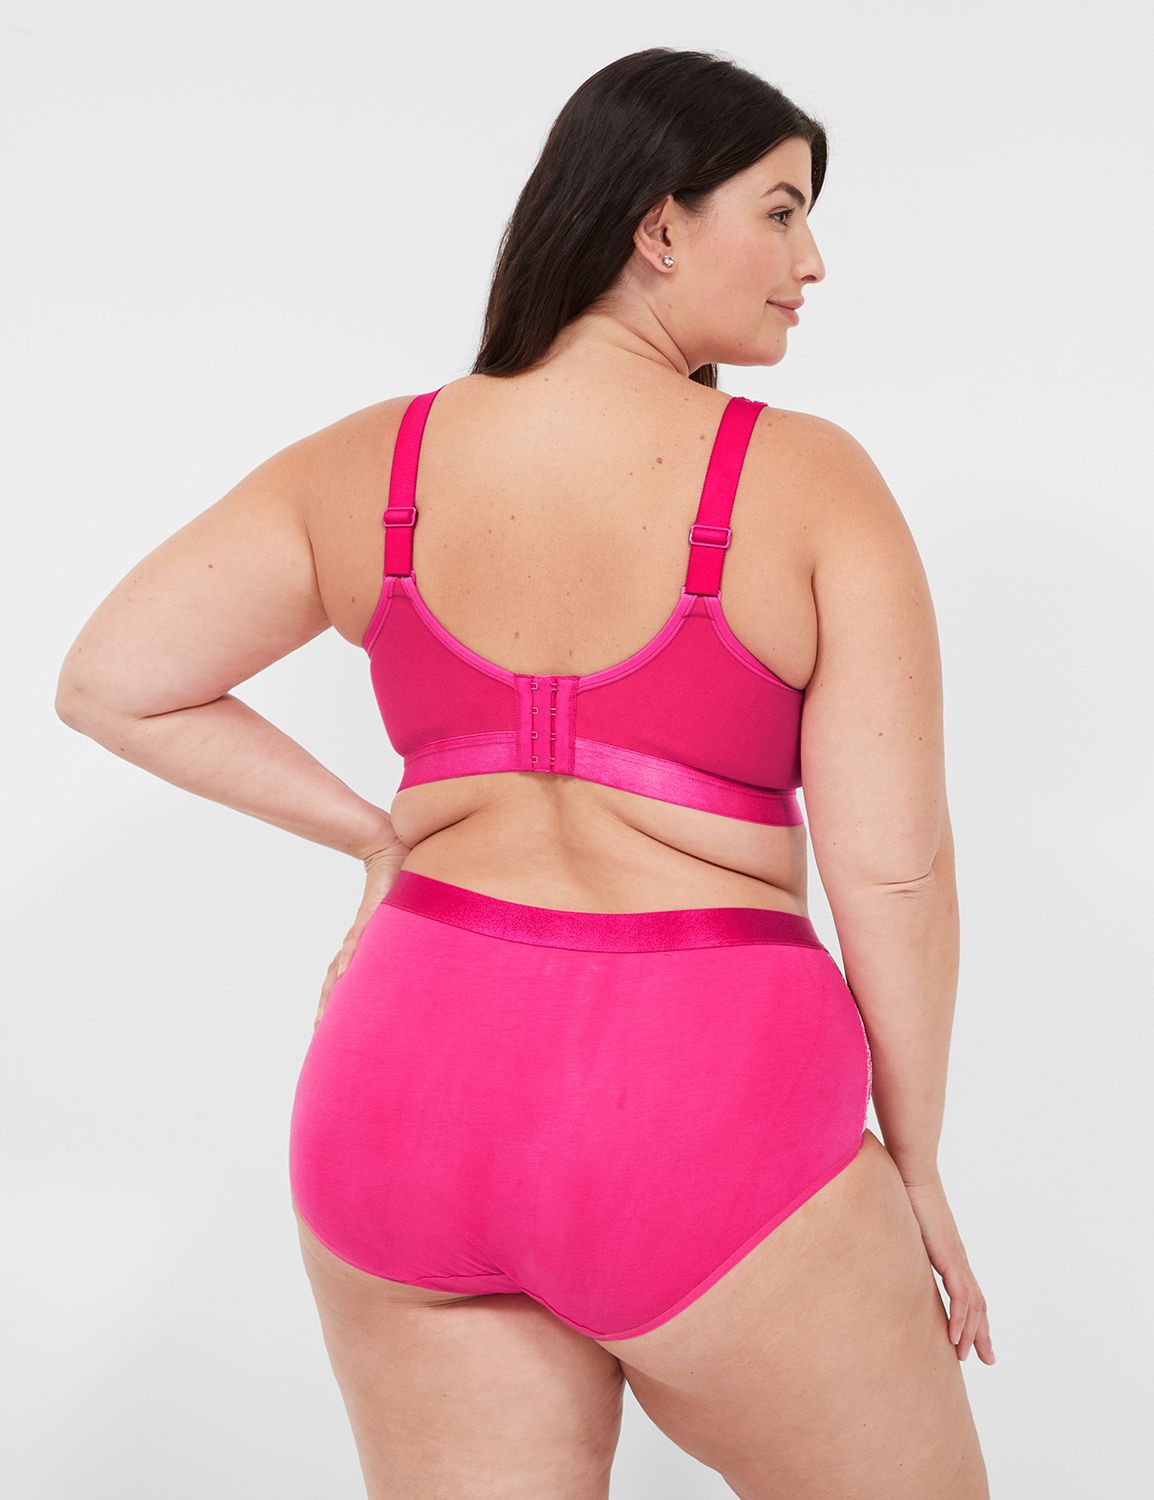 LANE BRYANT CACIQUE Seriously SEXY Pink CHEEKY Panties PLUS 22/24 Tulle  Back NWT $17.02 - PicClick